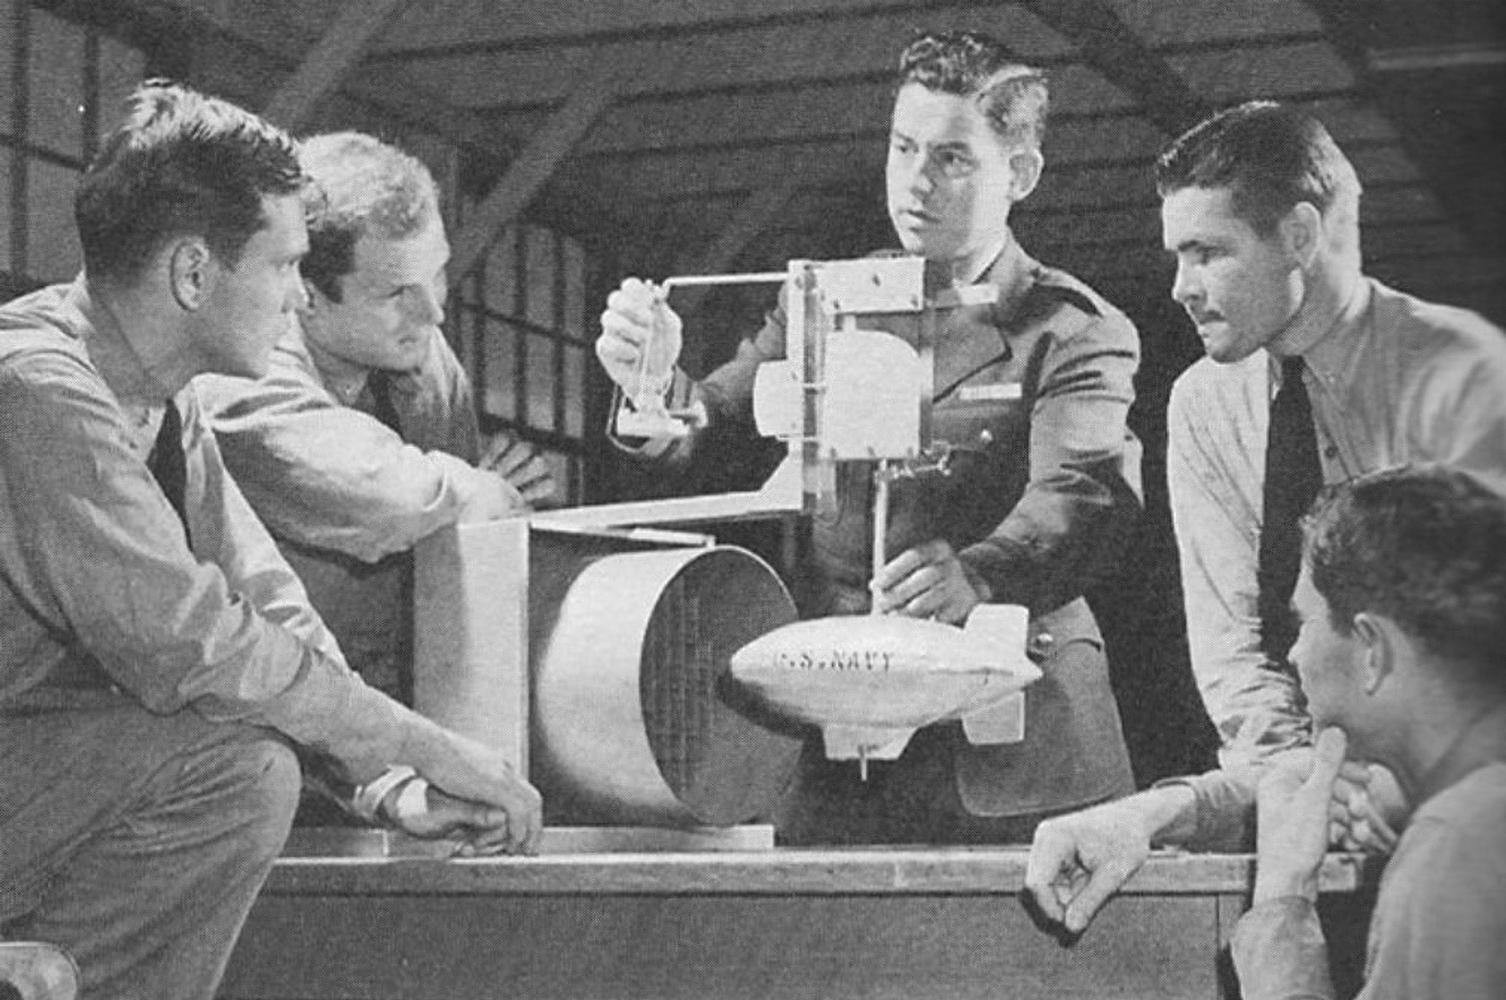 A Navy instructor holds two small posts attached to a tabletop model of a blimp near a fan. 4 cadets, on either side of their teacher, look at the model.